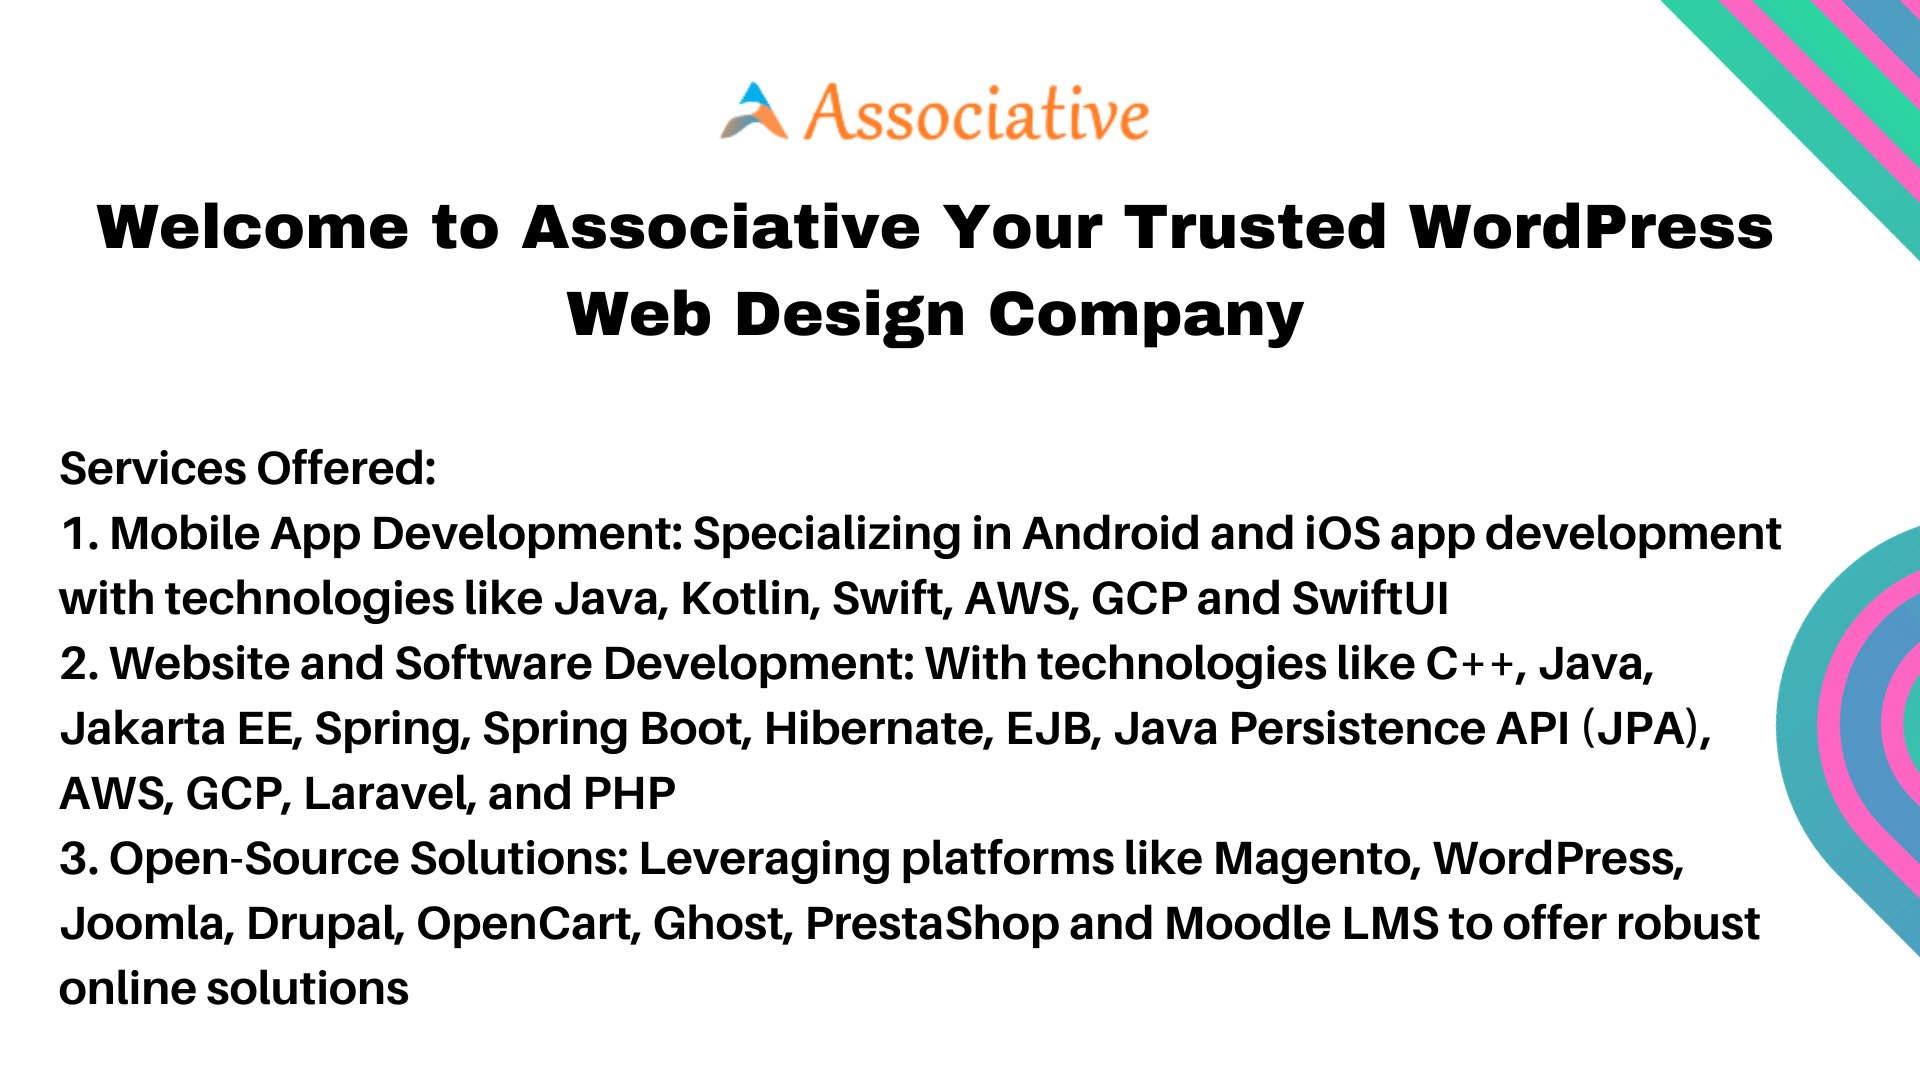 Welcome to Associative Your Trusted WordPress Web Design Company